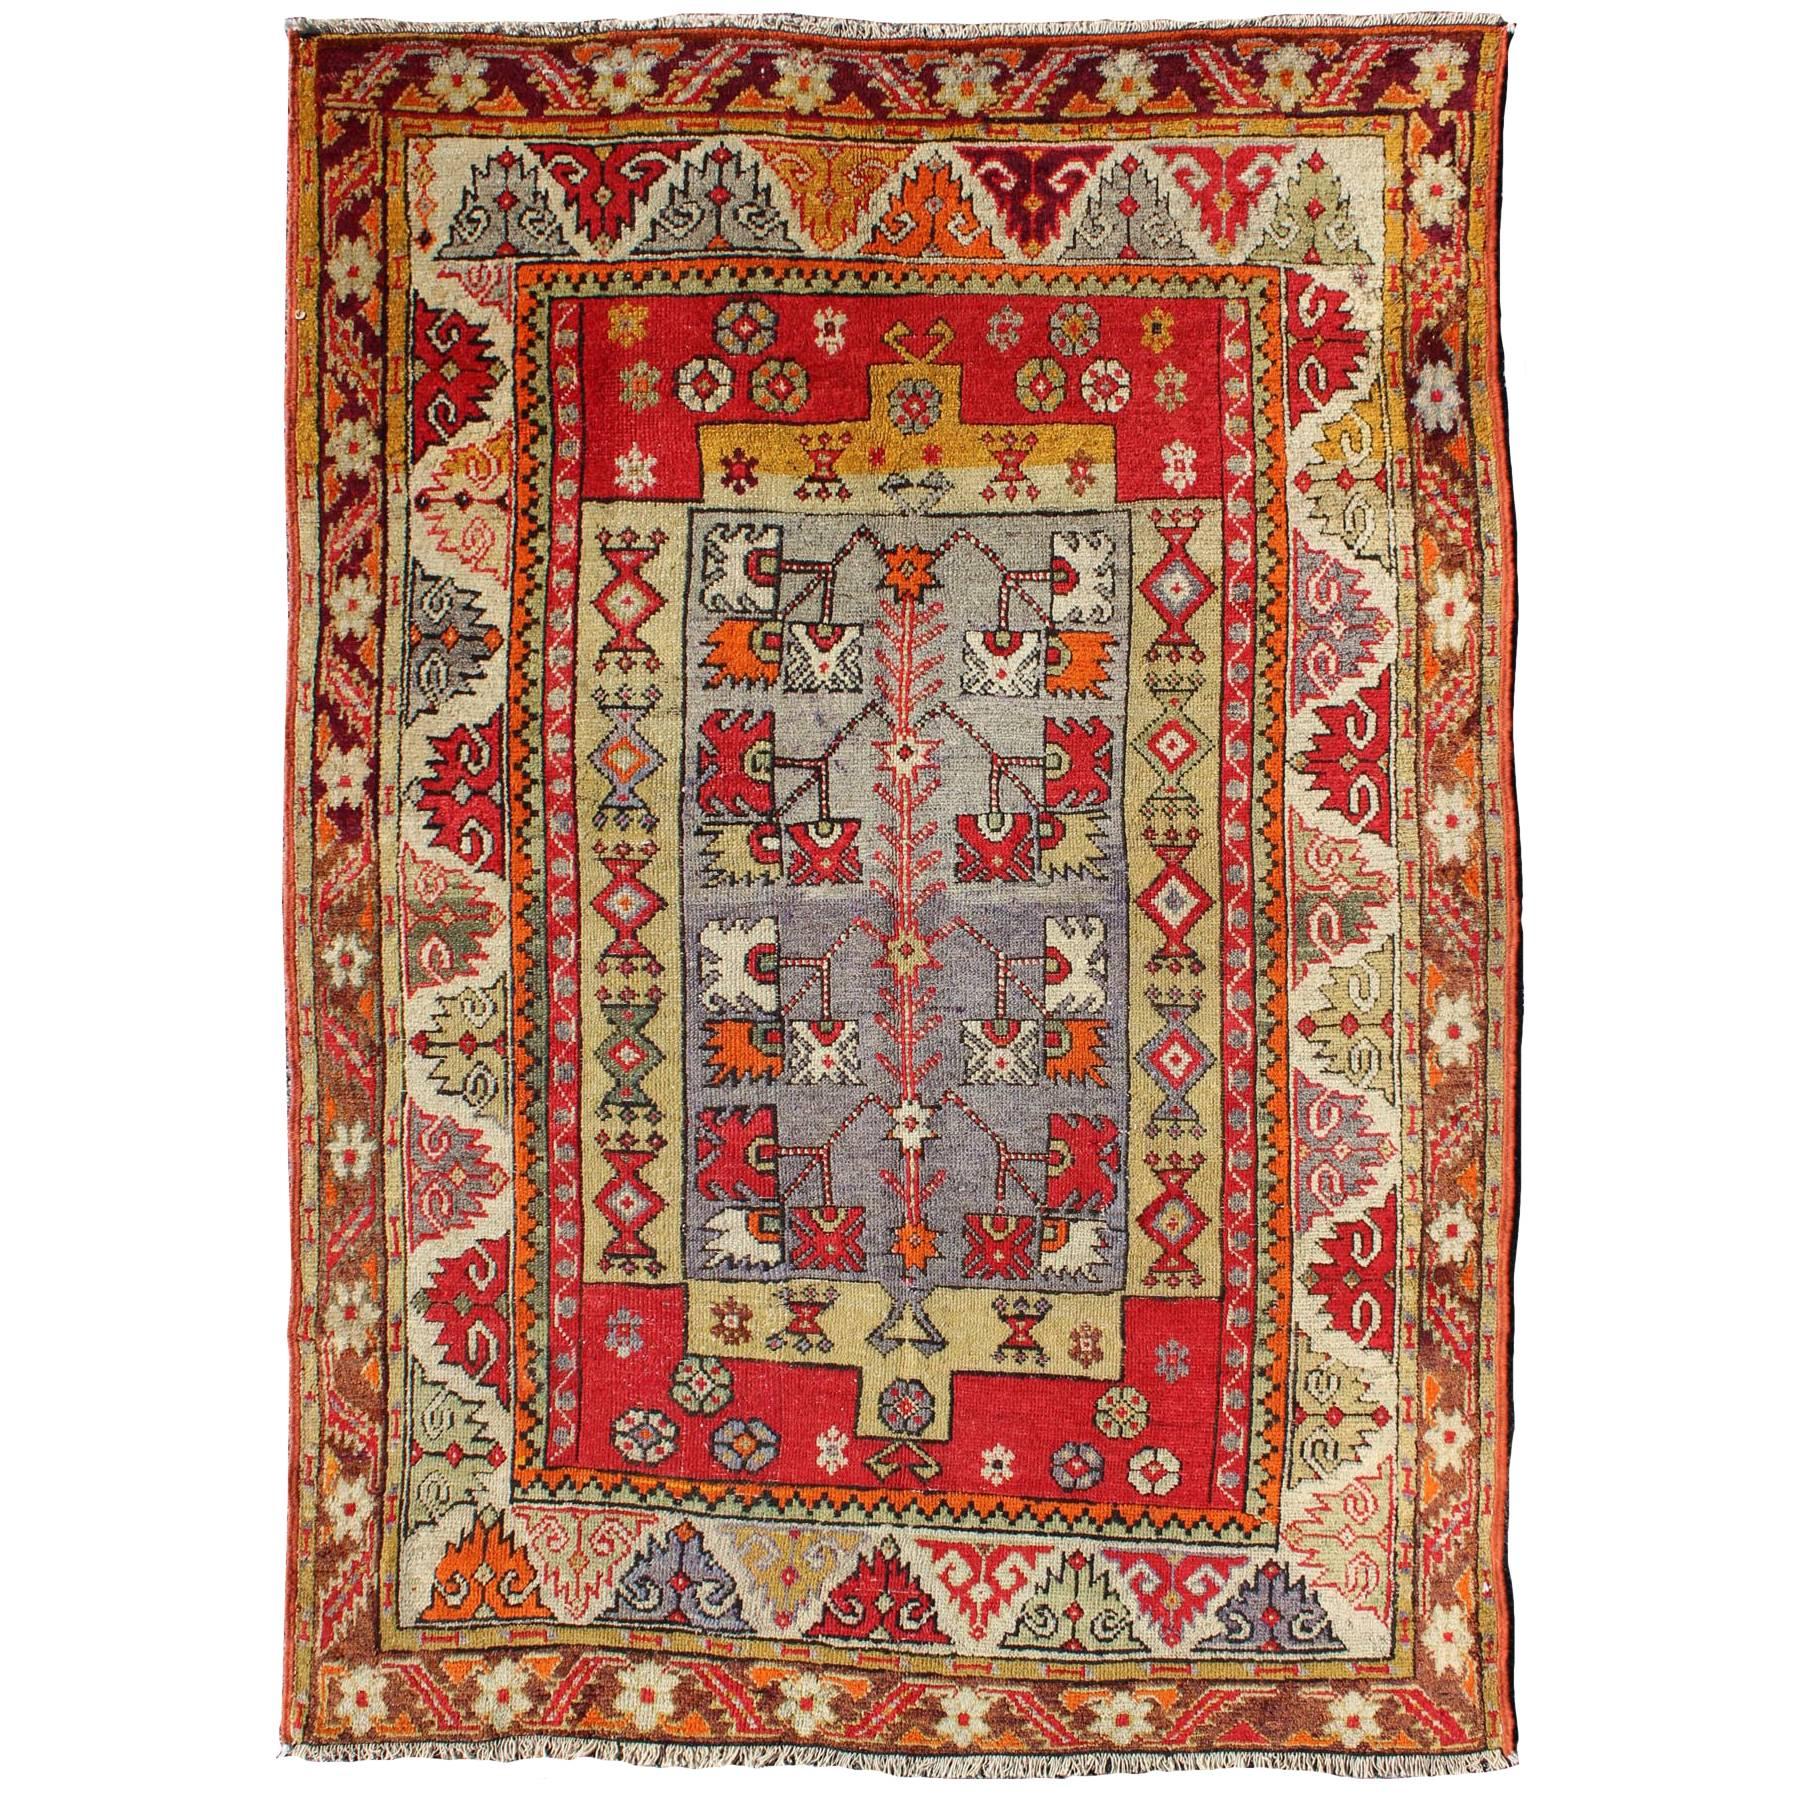    Colorful Antique Turkish Small Oushak Carpet in Multi Layered Design For Sale